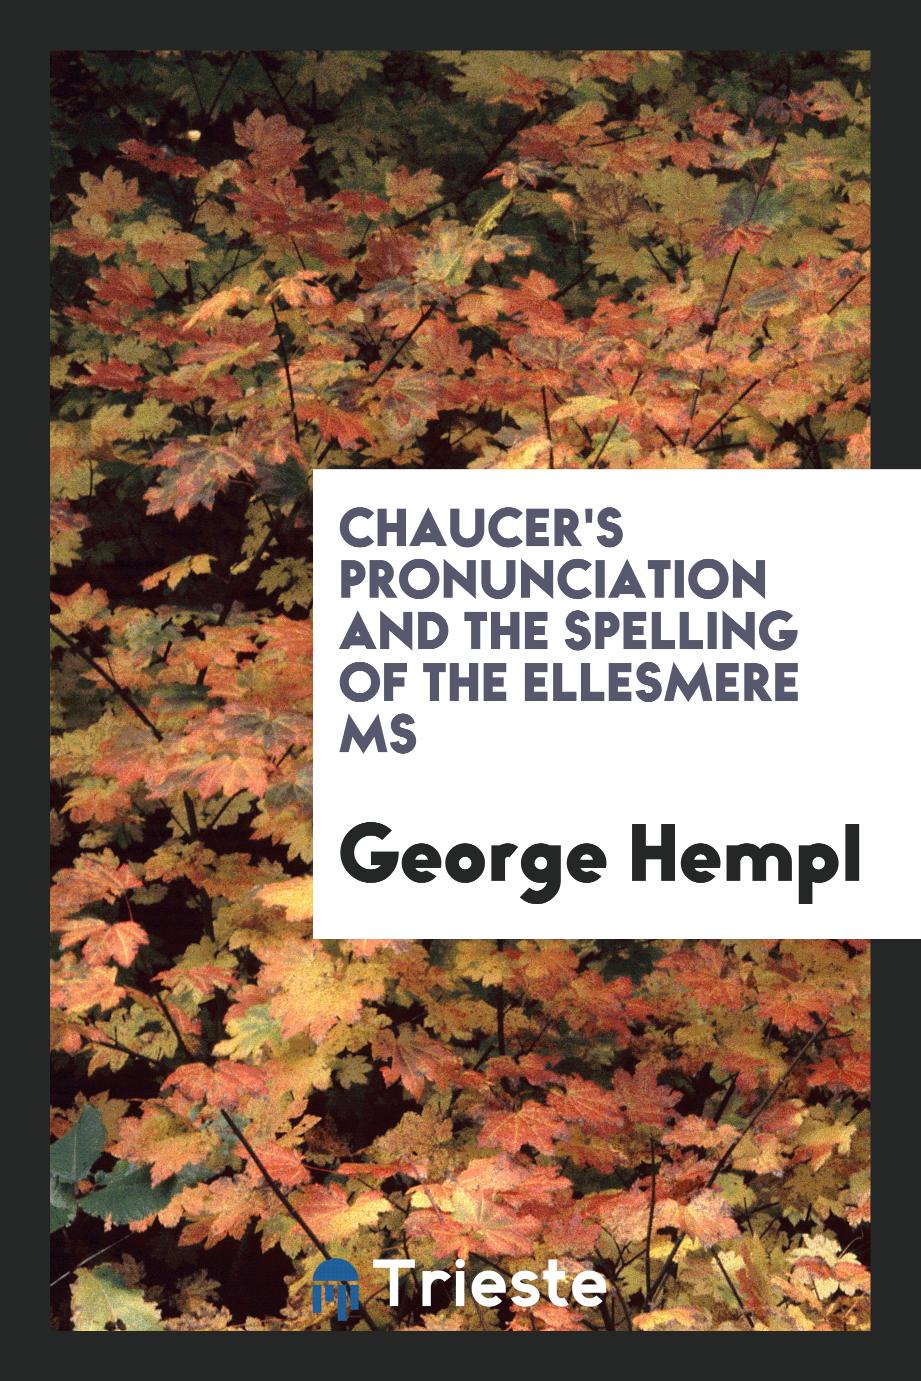 Chaucer's pronunciation and the spelling of the Ellesmere ms